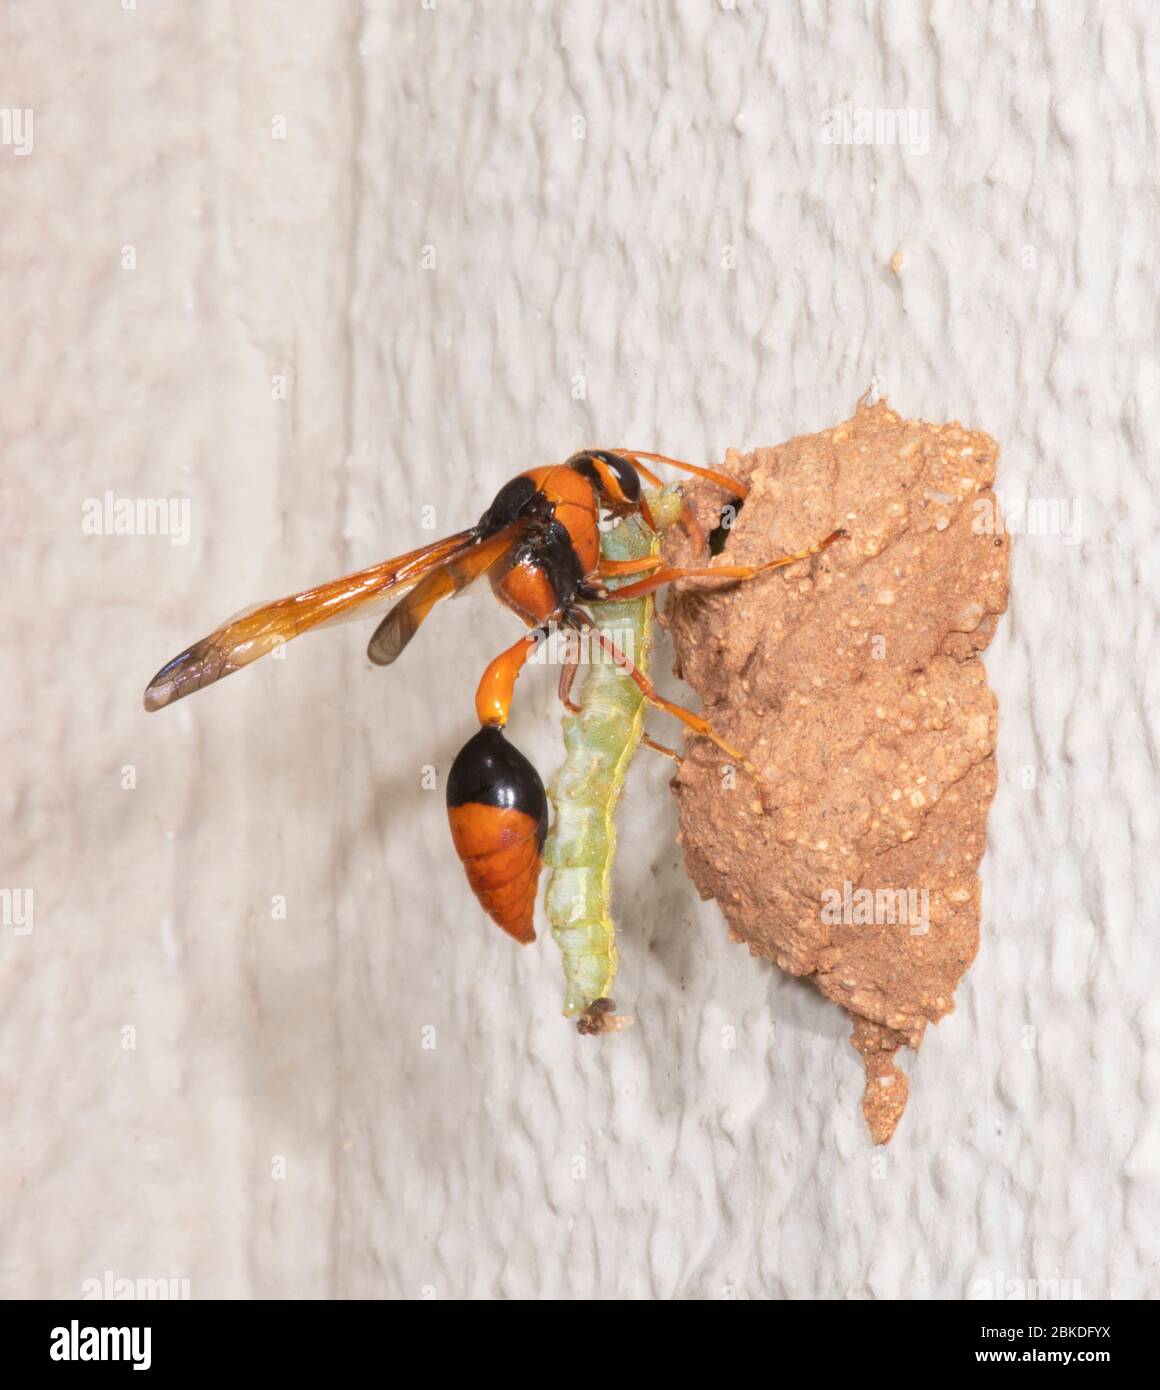 Orange Potter Wasp (Eumenes latreilli) carrying a paralized caterpillar to its nest, Alice Springs, Northern Territory, NT, Australia Stock Photo